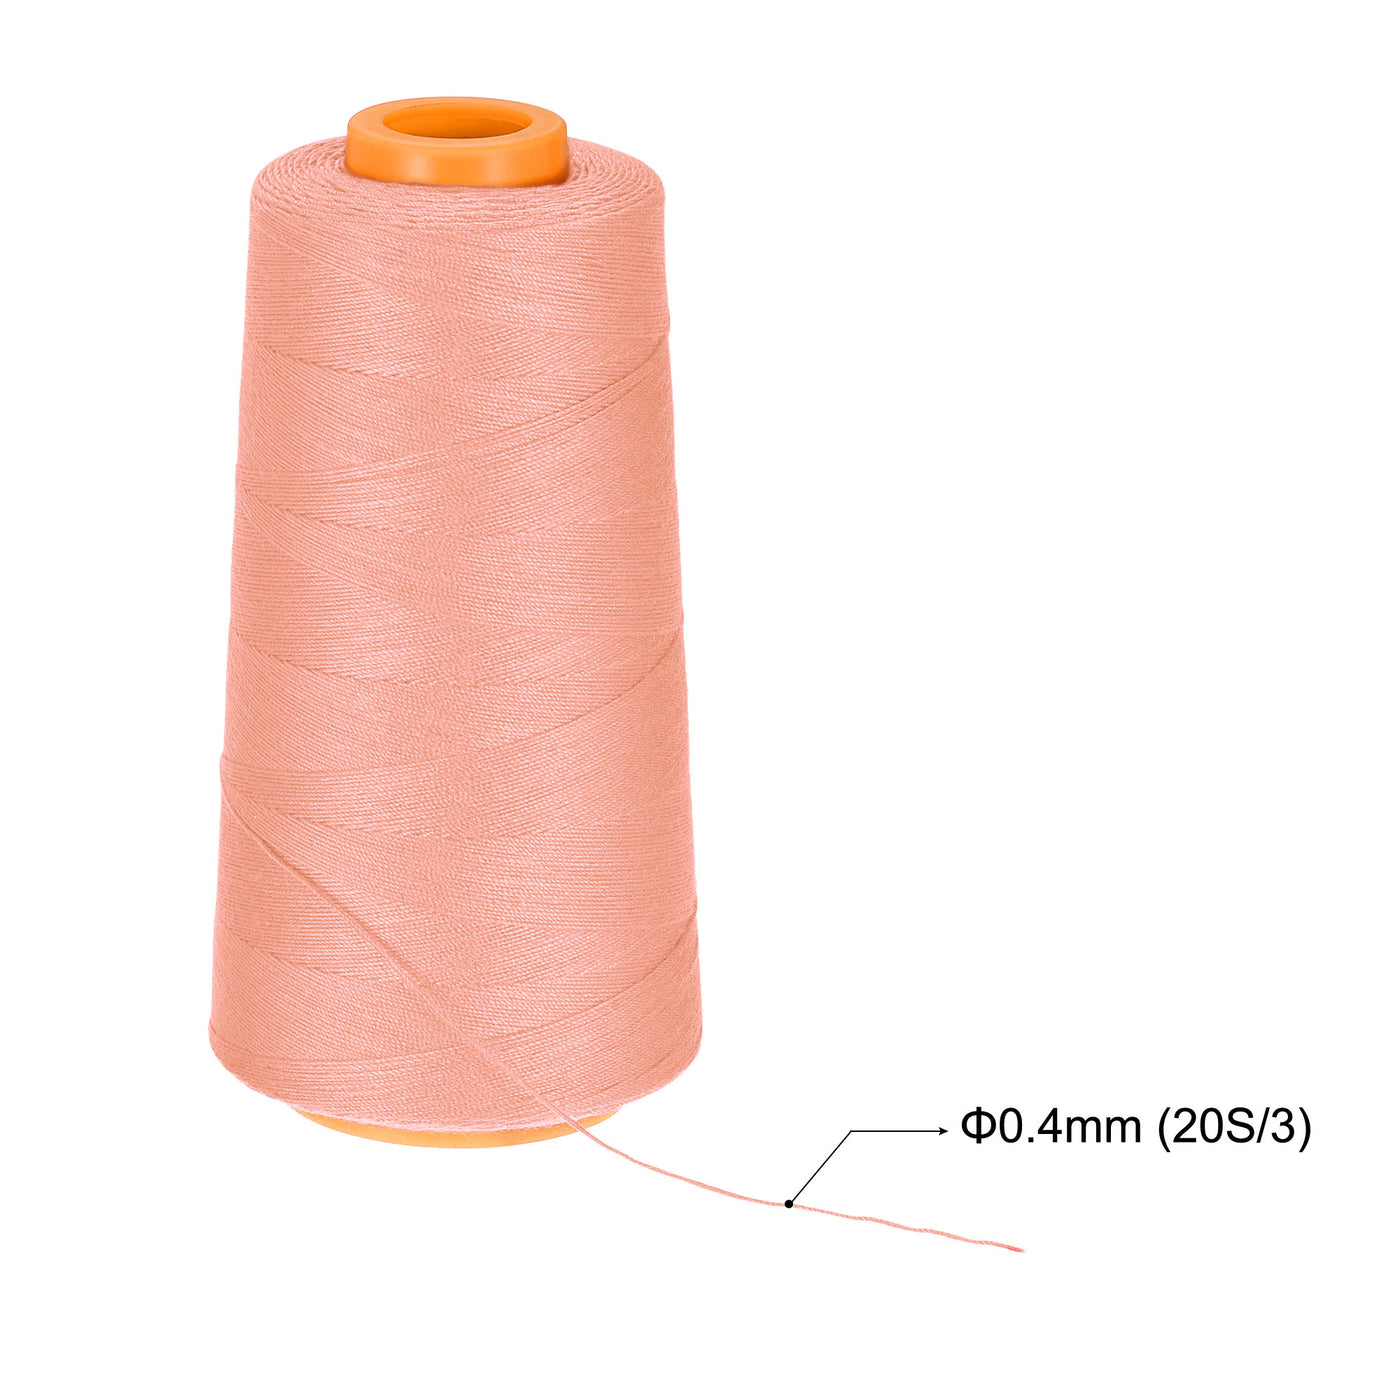 Uxcell Uxcell 1000 Yards 20S/3 All-Purpose Polyester Sewing Thread, Pink